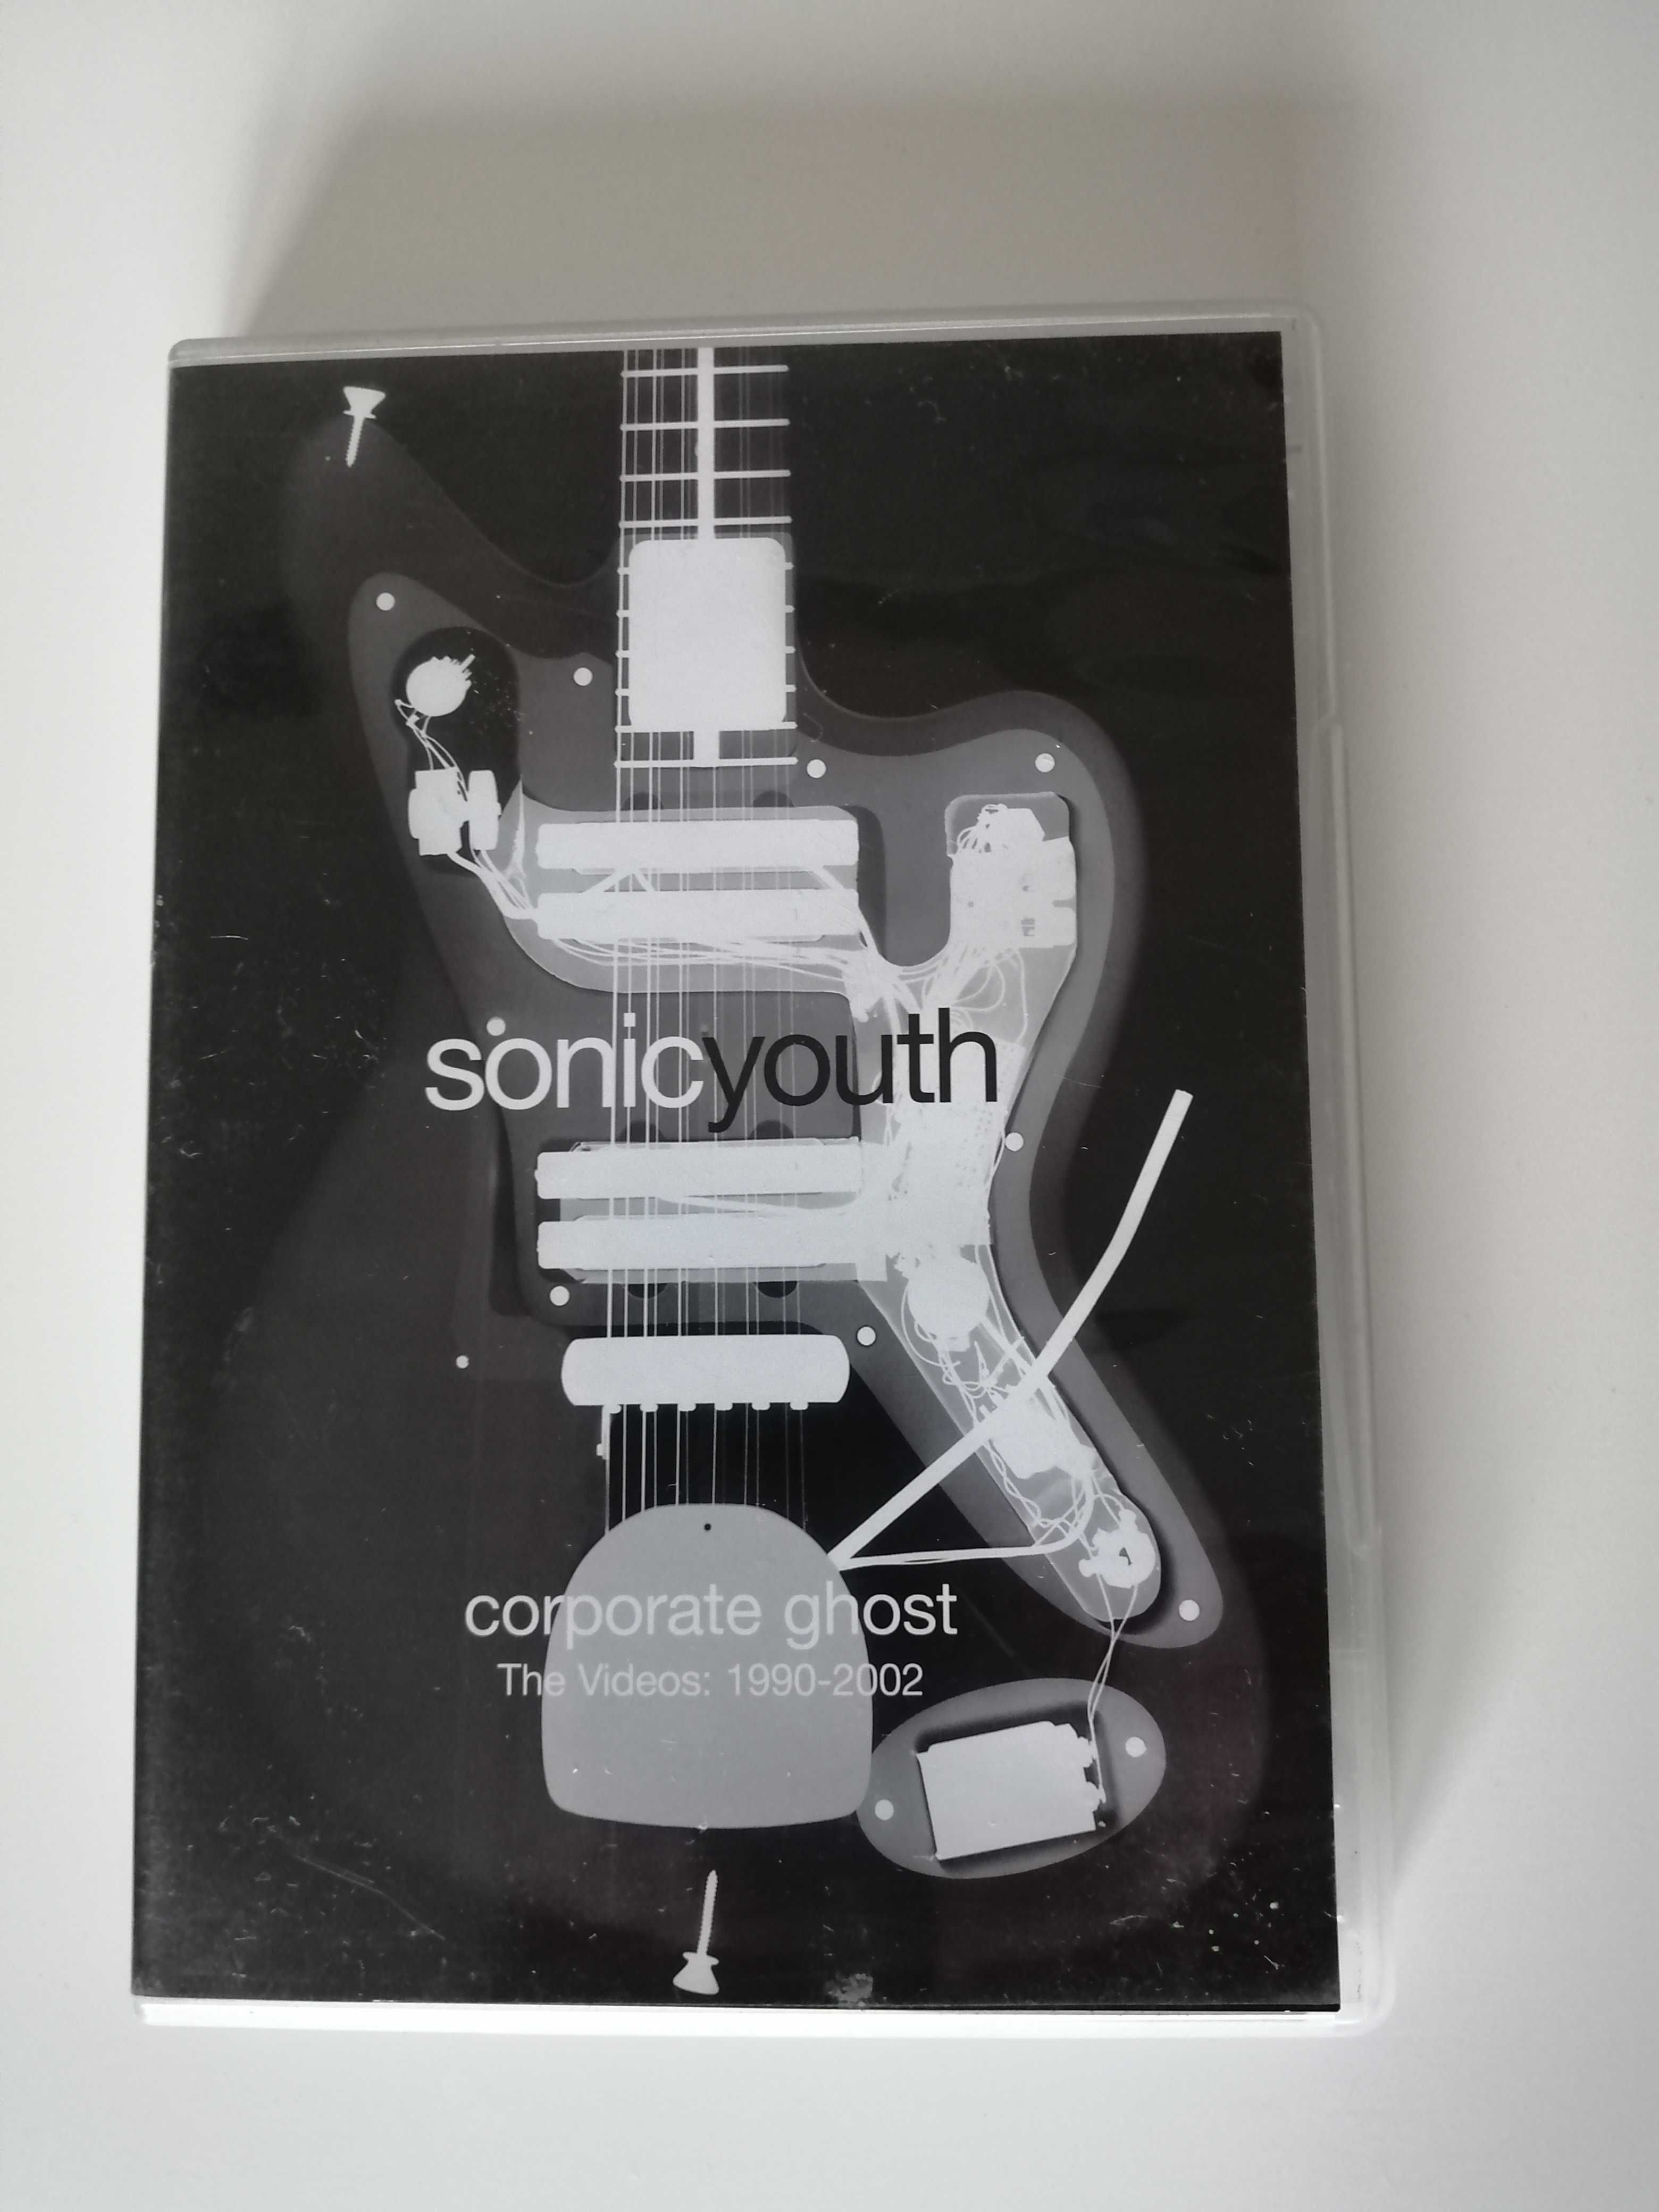 Sonic Youth - Corporate Ghost: Videos, 1990 - 2002 DVD